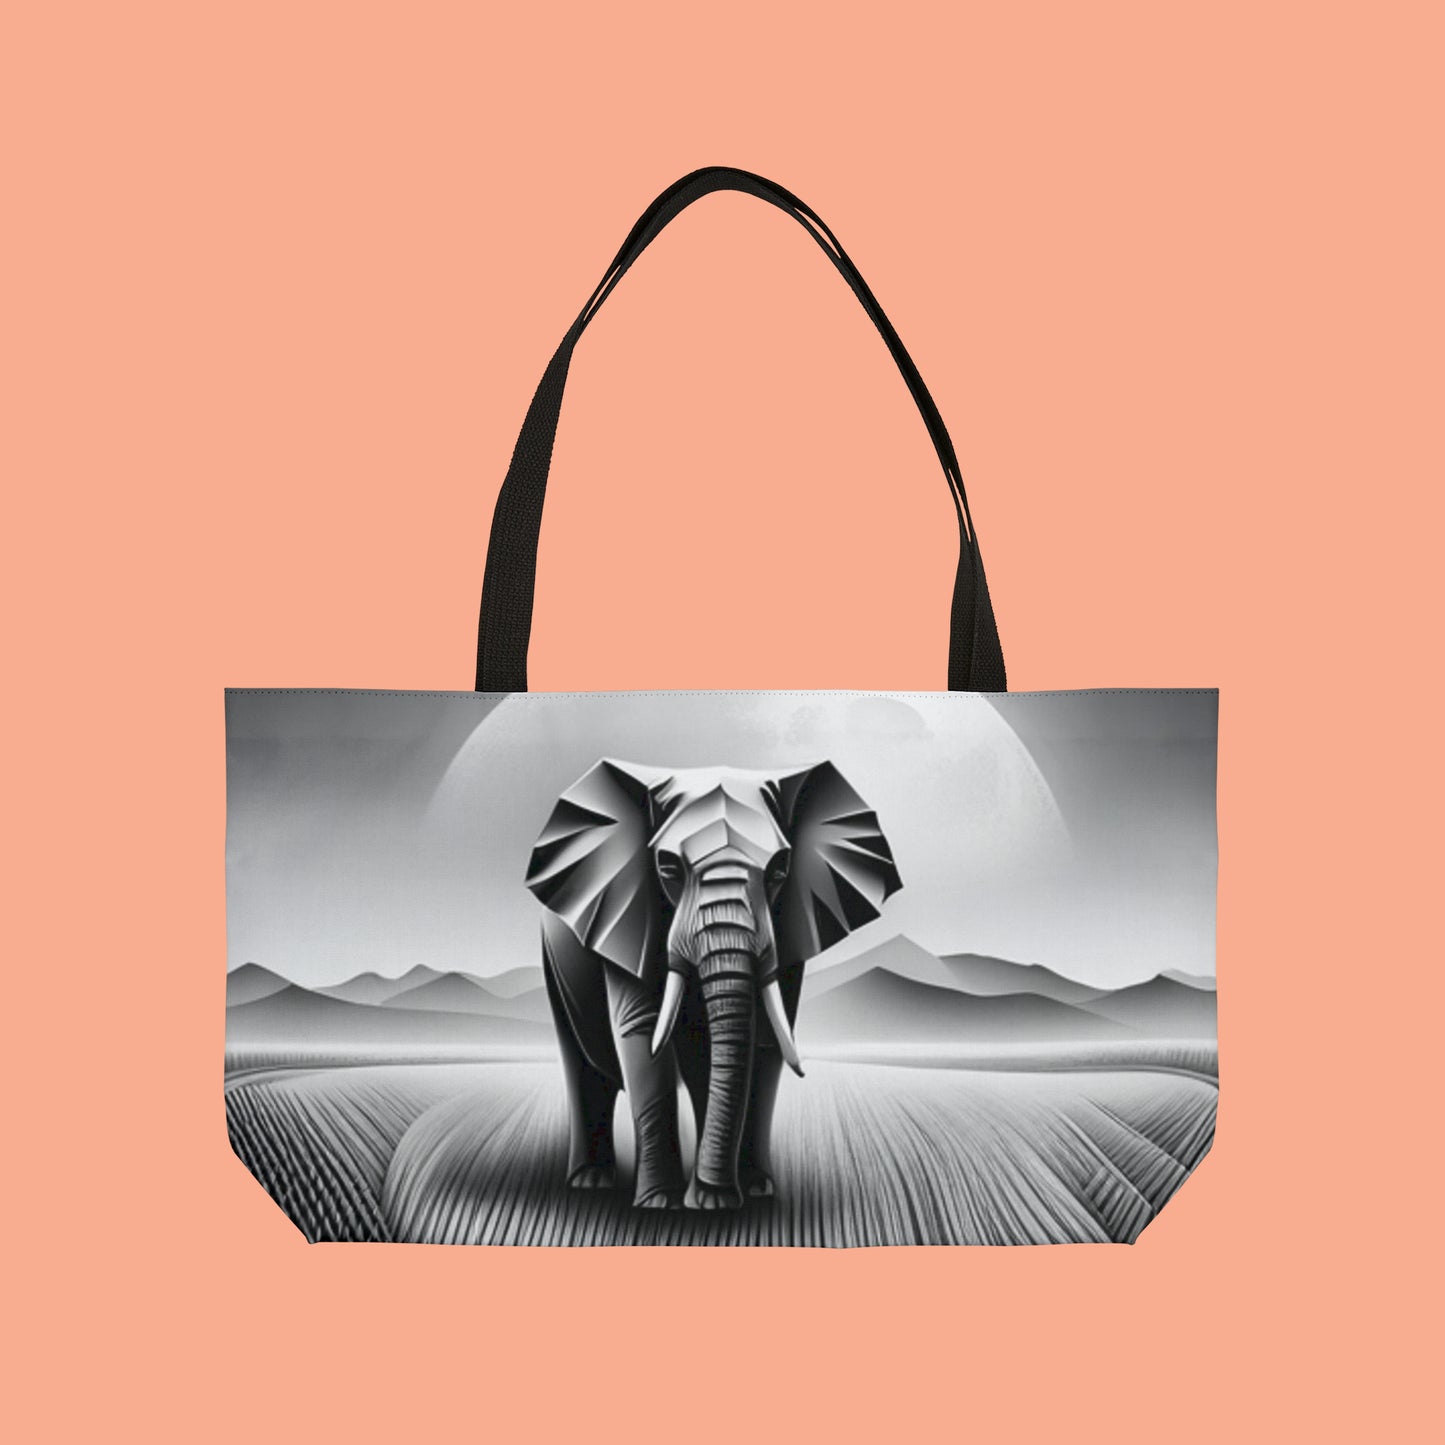 Magnificent elephant and Origami inspired style design on this Weekender Tote Bag.